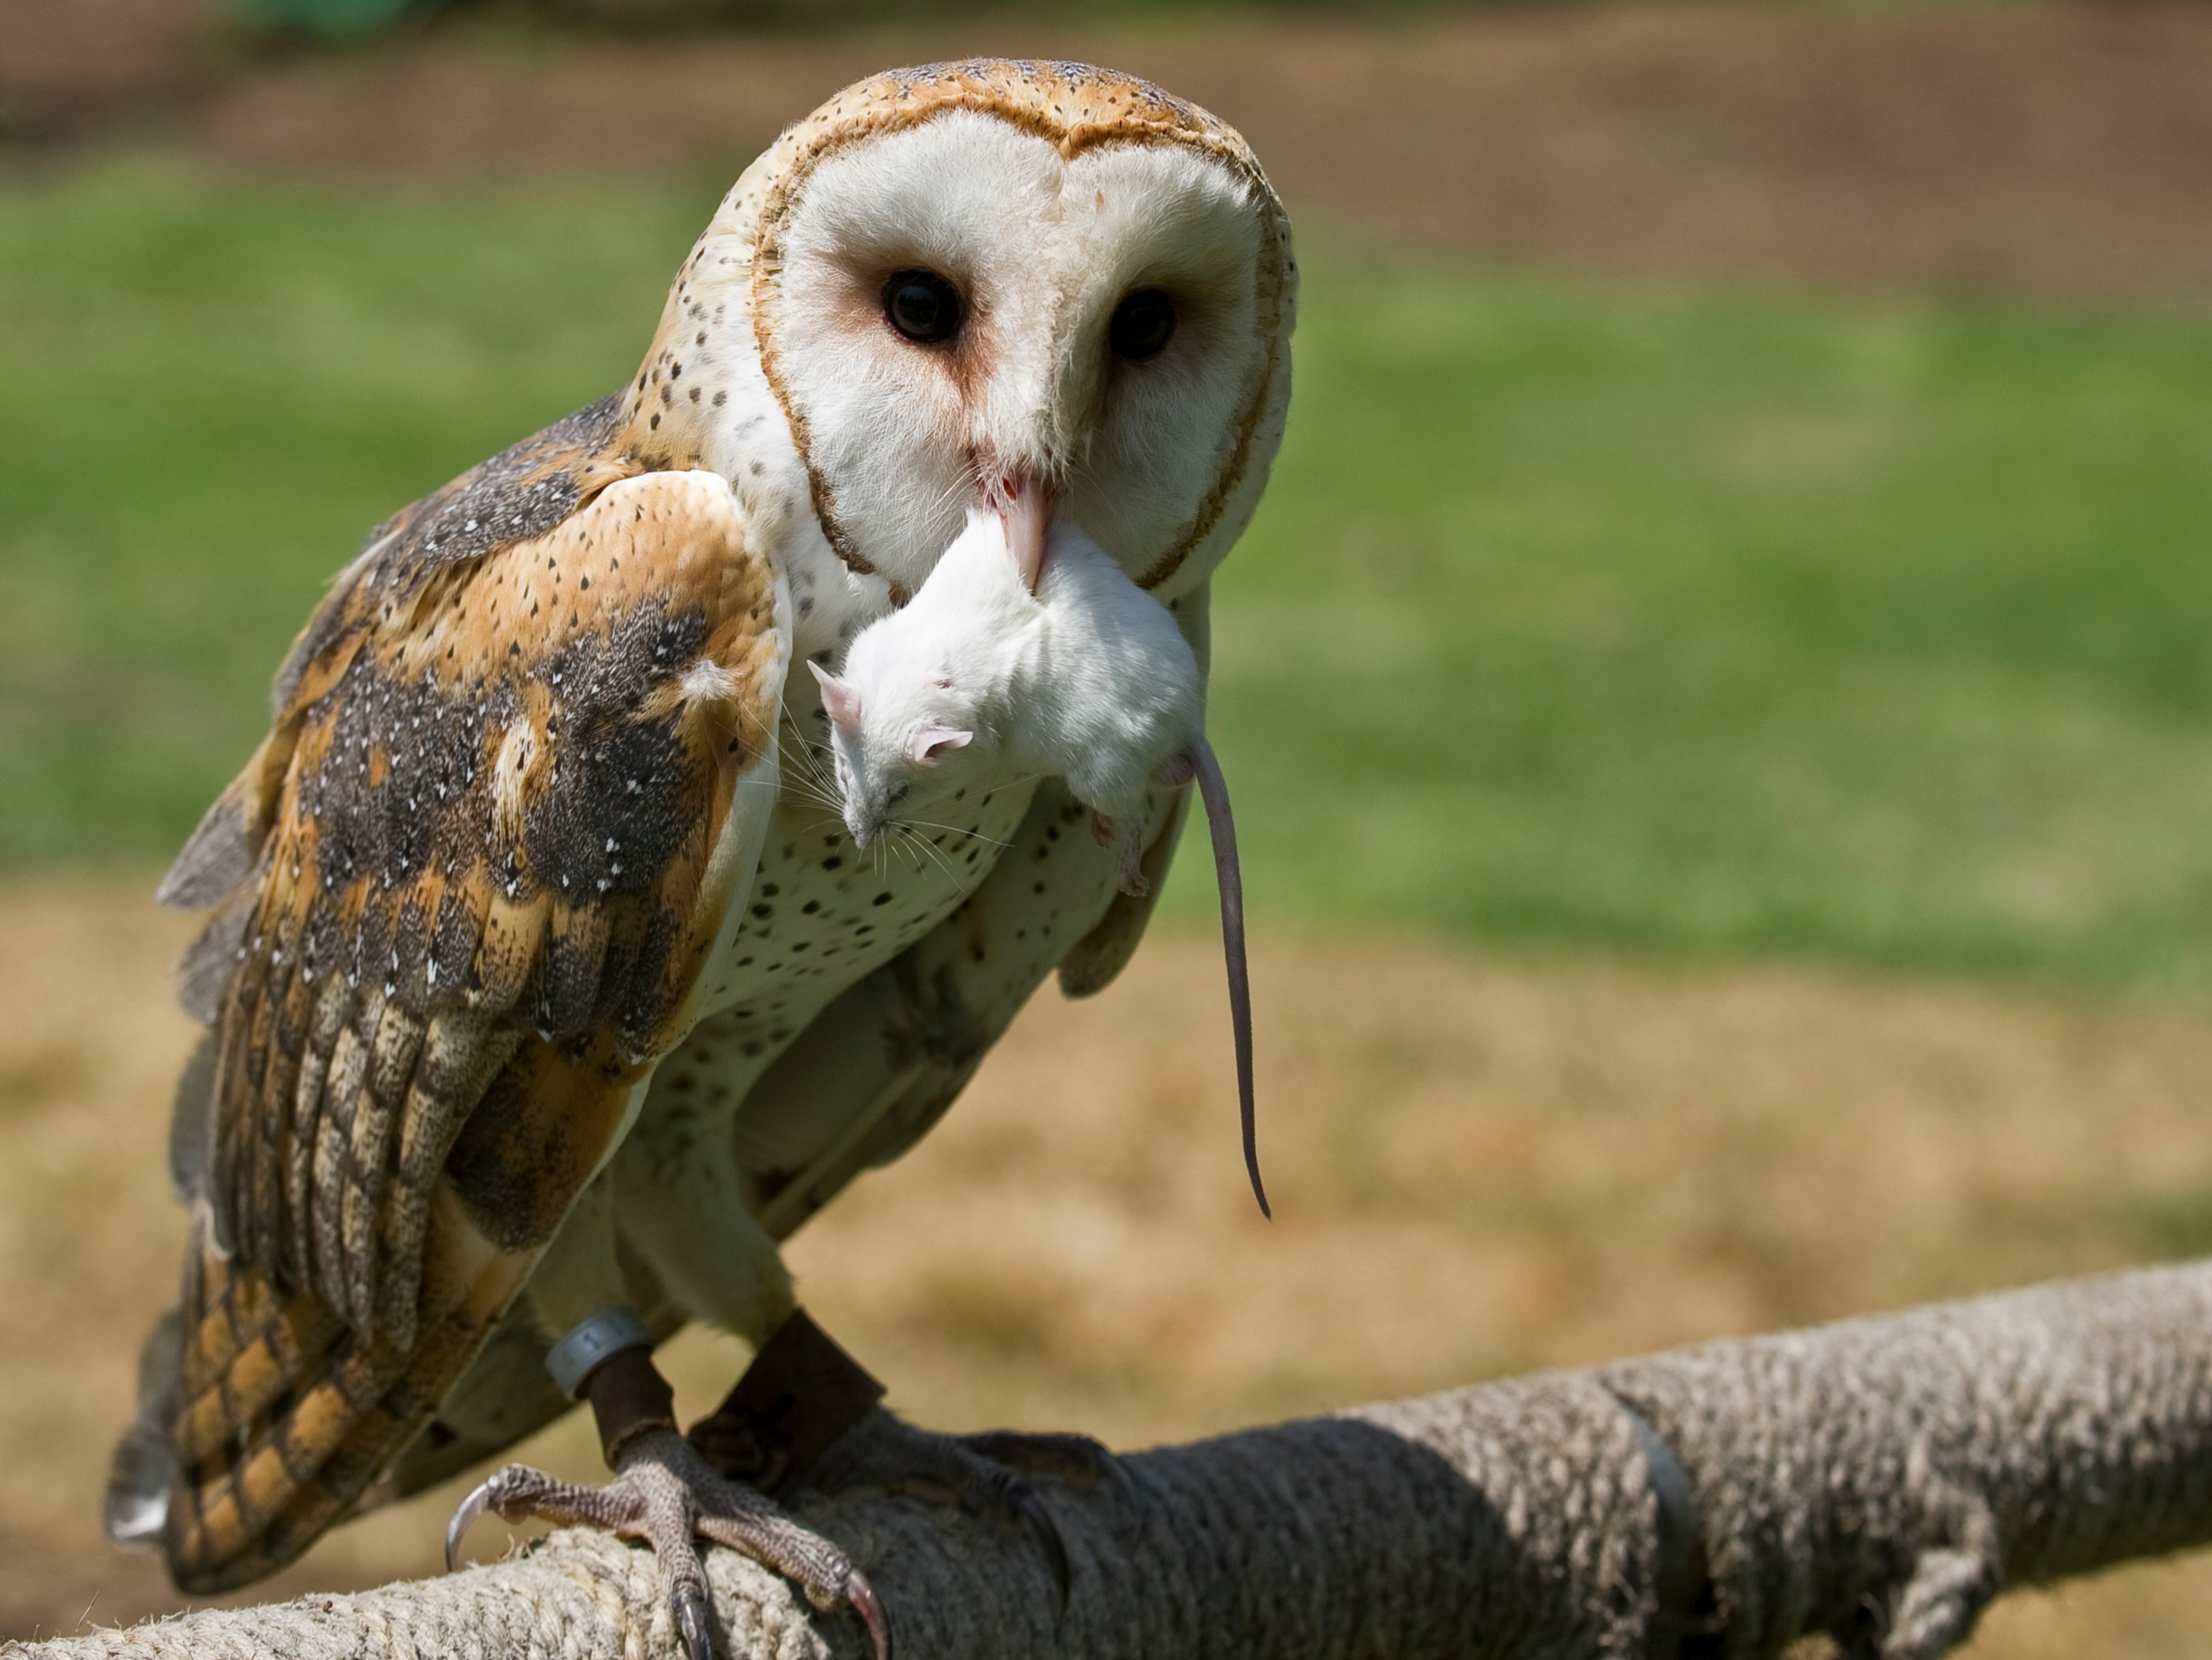 Most British barn owls have rodent poison in them from eating small animals, analysis has found